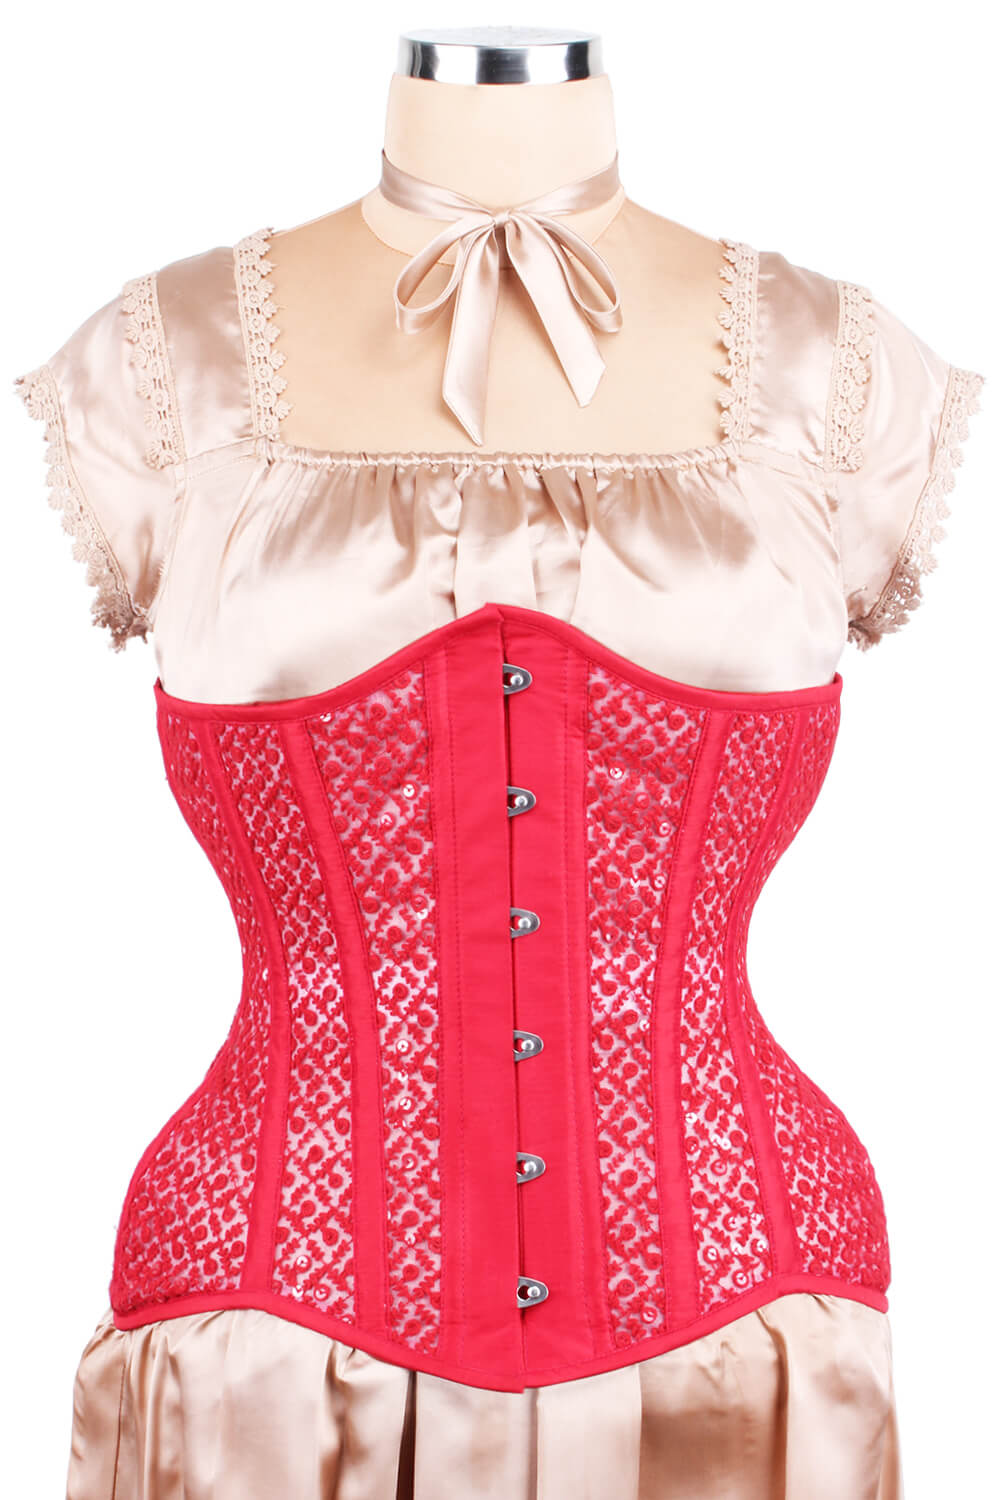 Mesh with Lace Overlay Custom Made Red Underbust Corset (ELC-102)